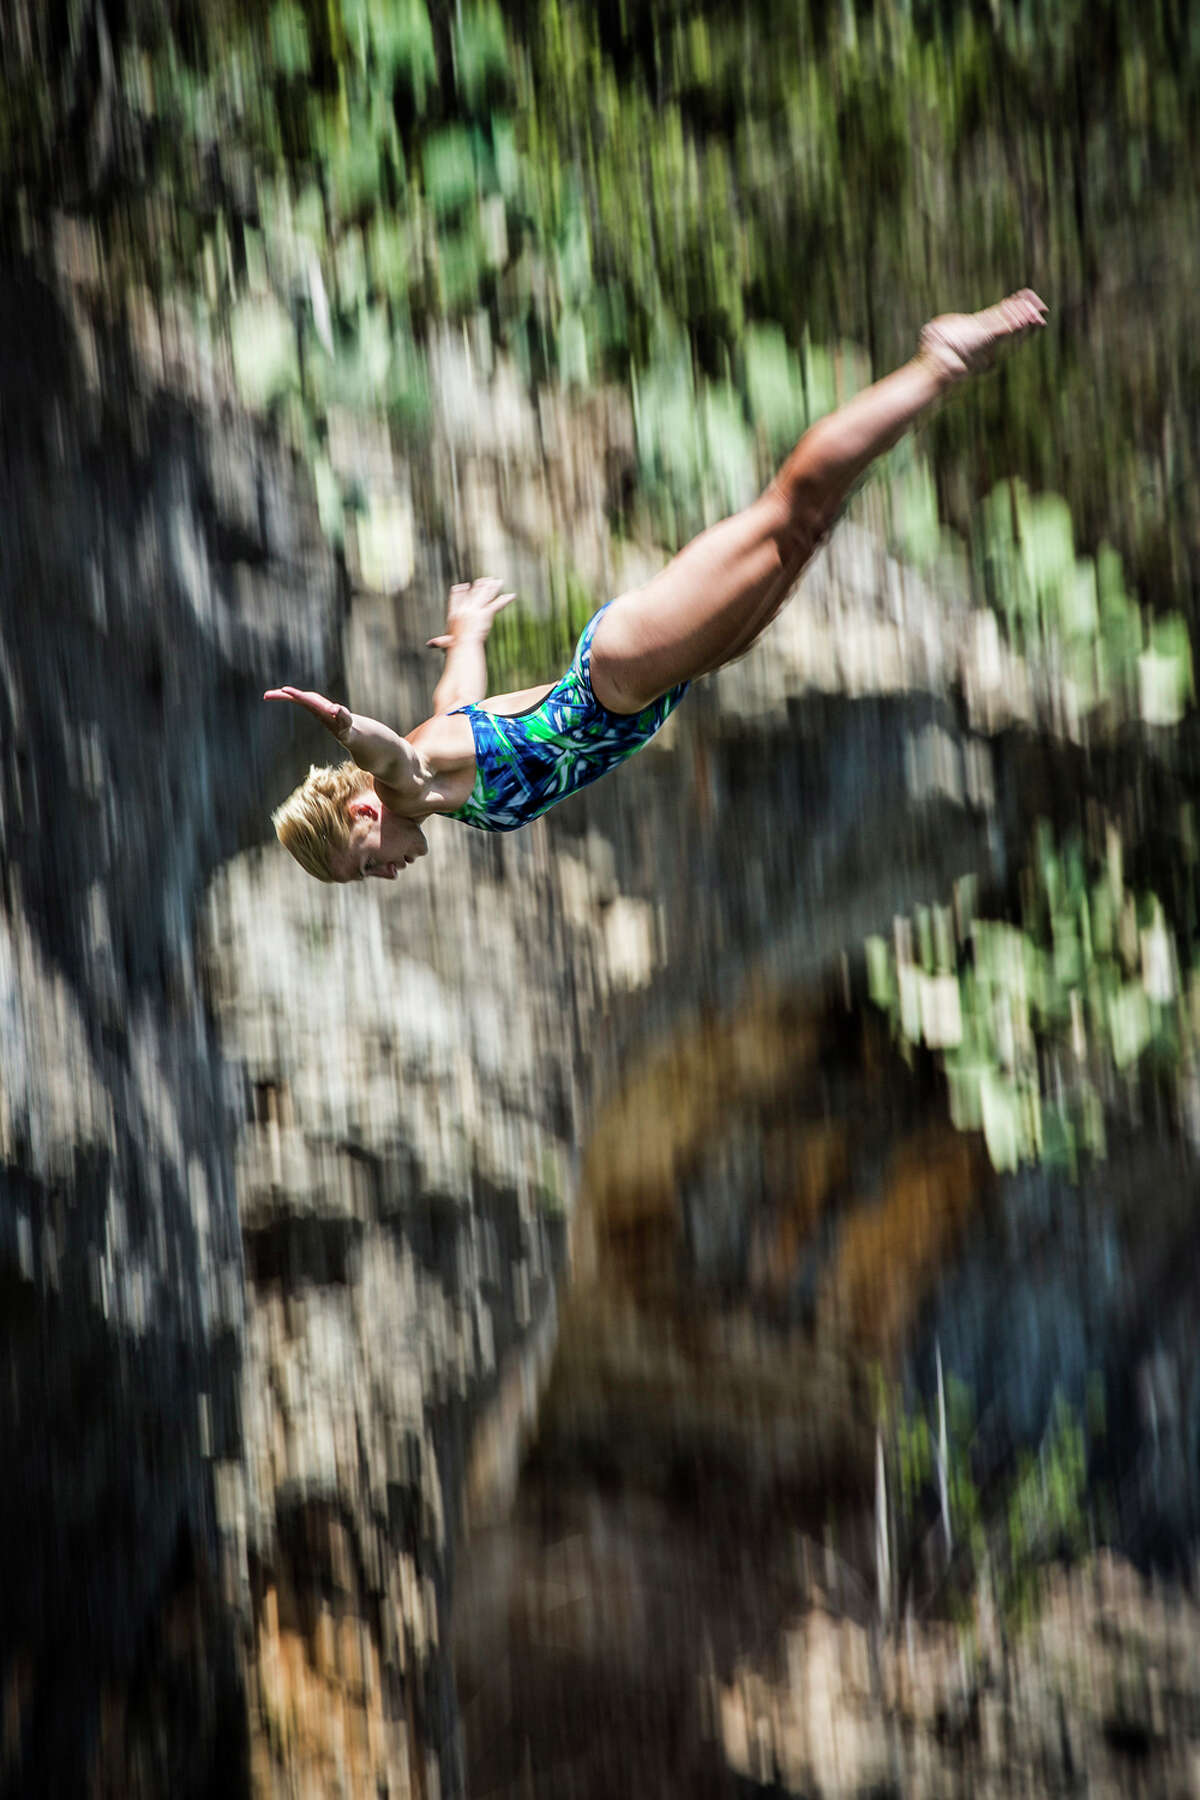 Cesilie Carlton of the USA dives from the 20-meter platform at Hells Gate during the second training session of the second stop of the Red Bull Cliff Diving World Series on June 6, 2014 in Possum Kingdom Lake, Texas.